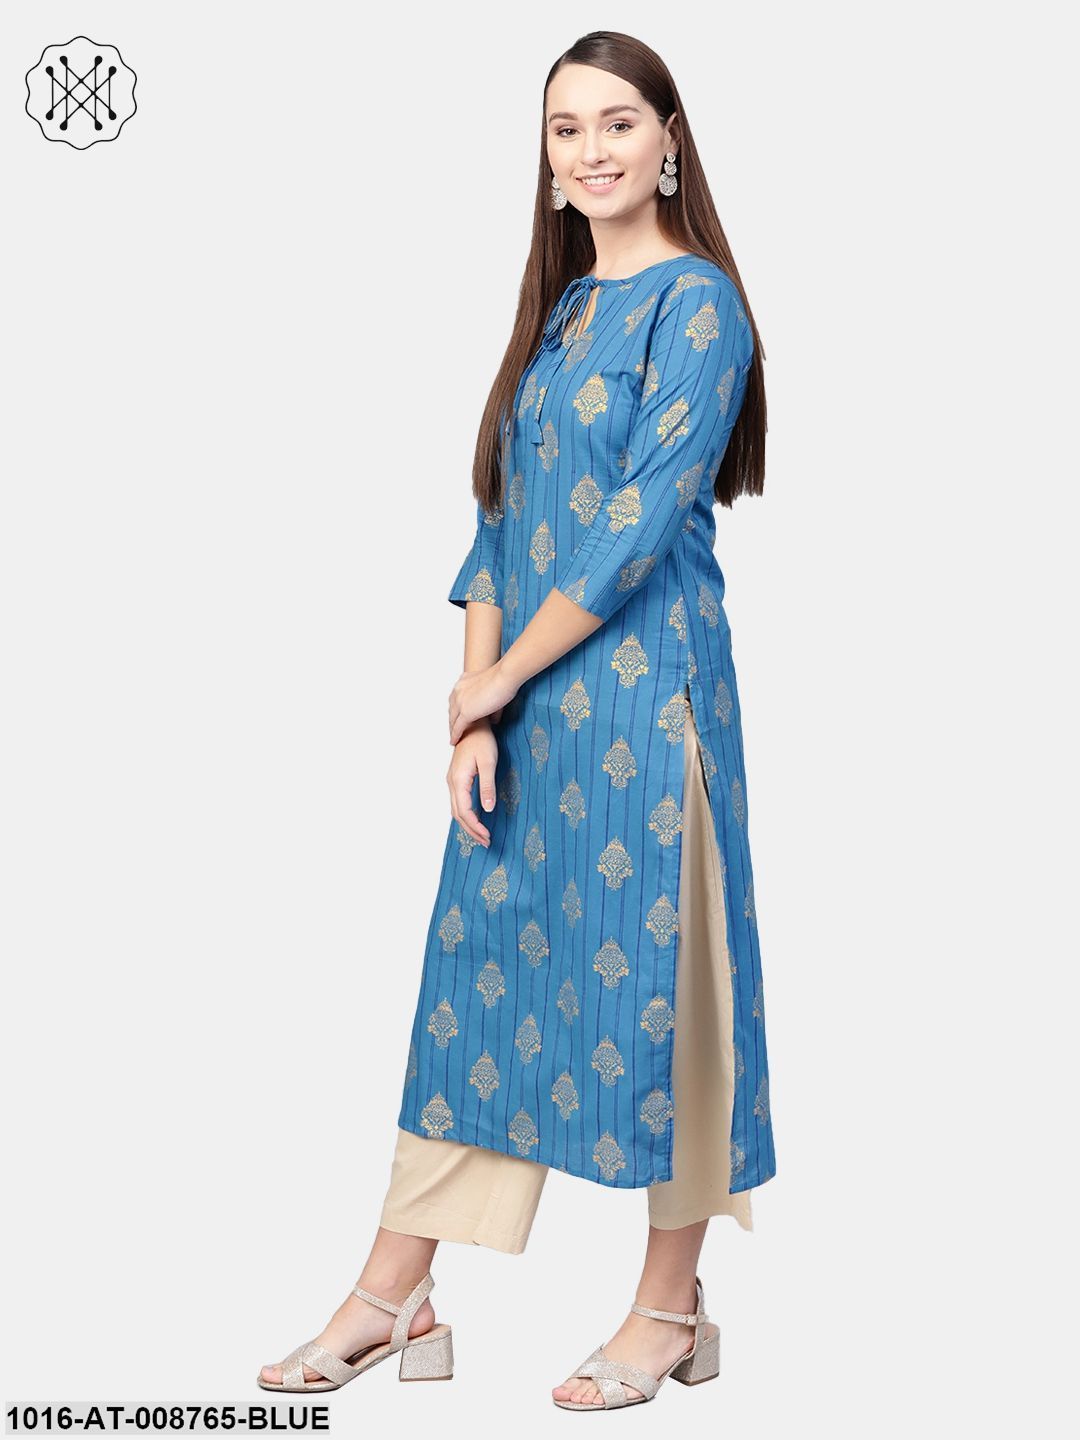 Cobalt blue Gold printed Striaght kurta with Keyhole neck & 3/4 sleeves